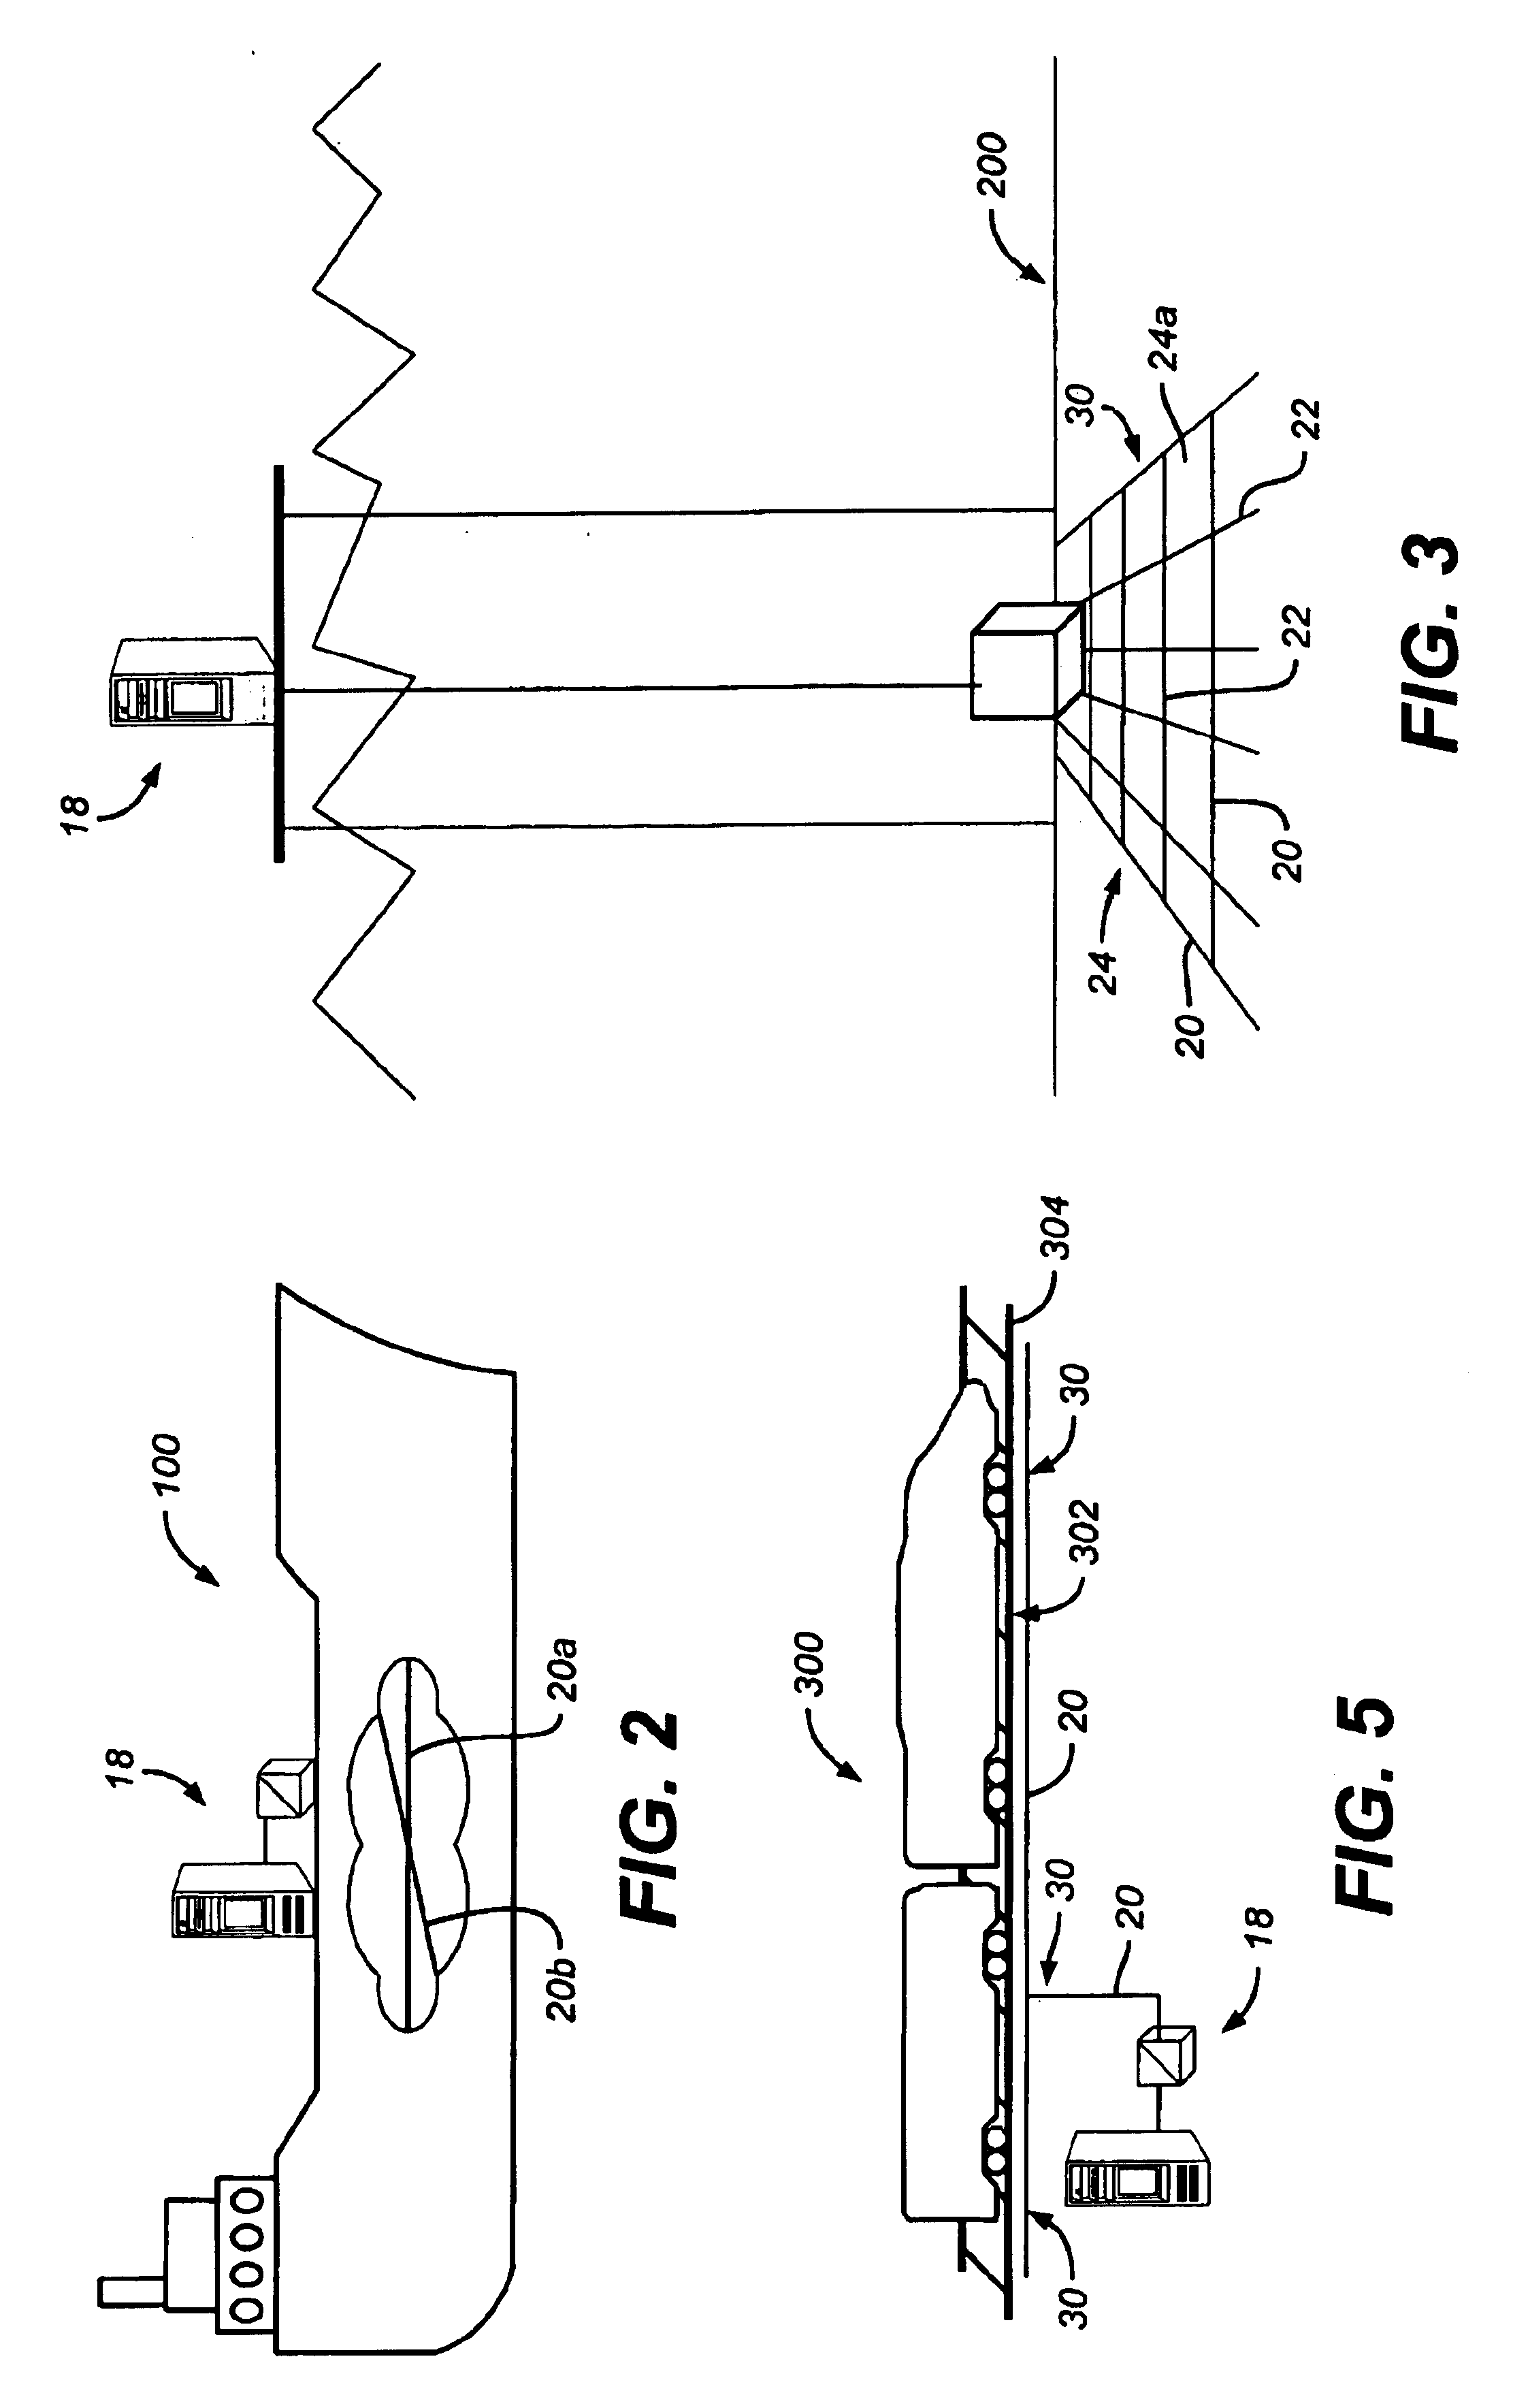 Method and system for monitoring smart structures utilizing distributed optical sensors